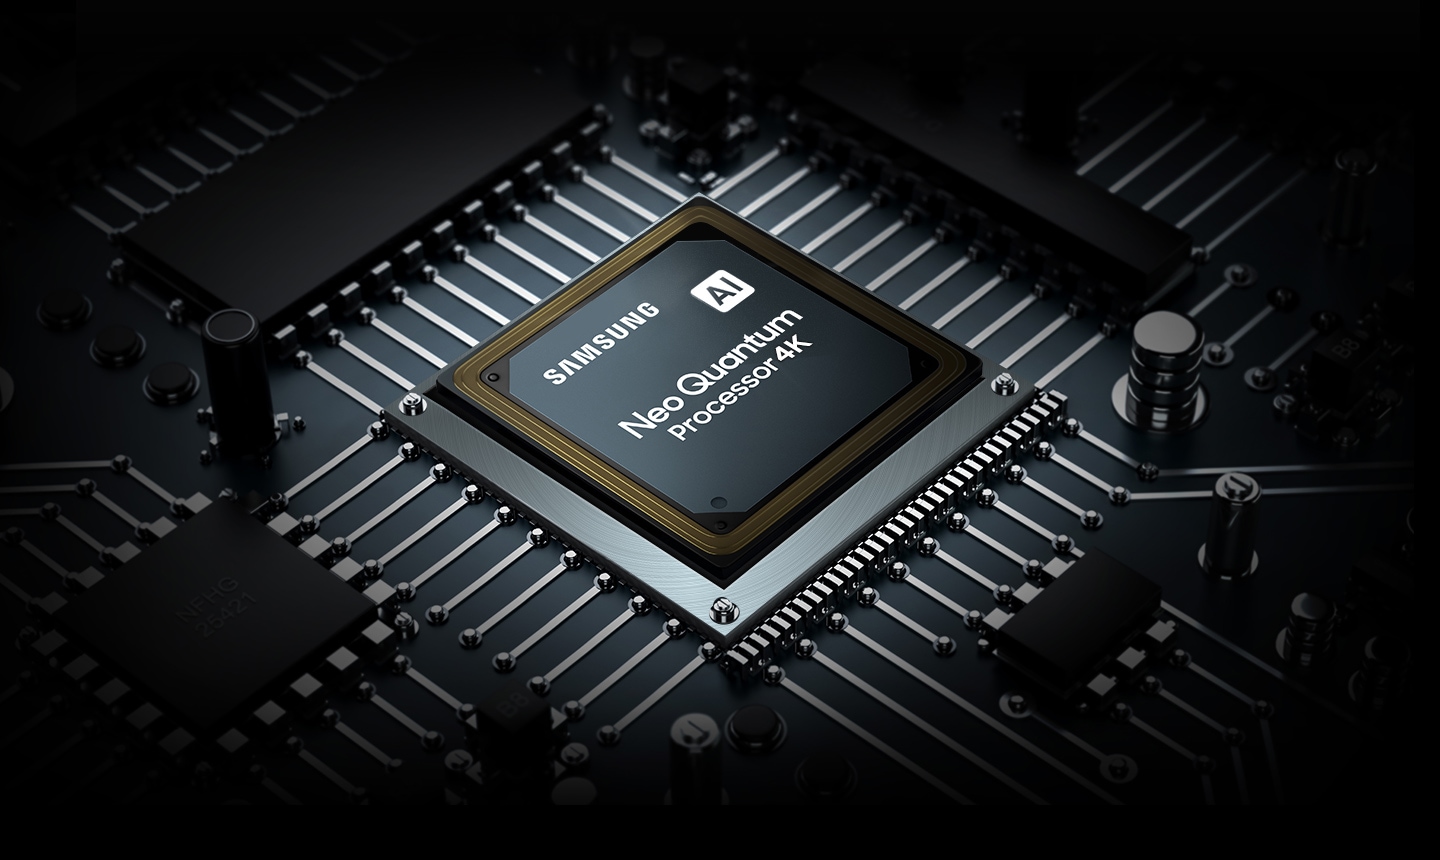 The AI Neo Quantum Processor 4K chip flashes after it is installed.